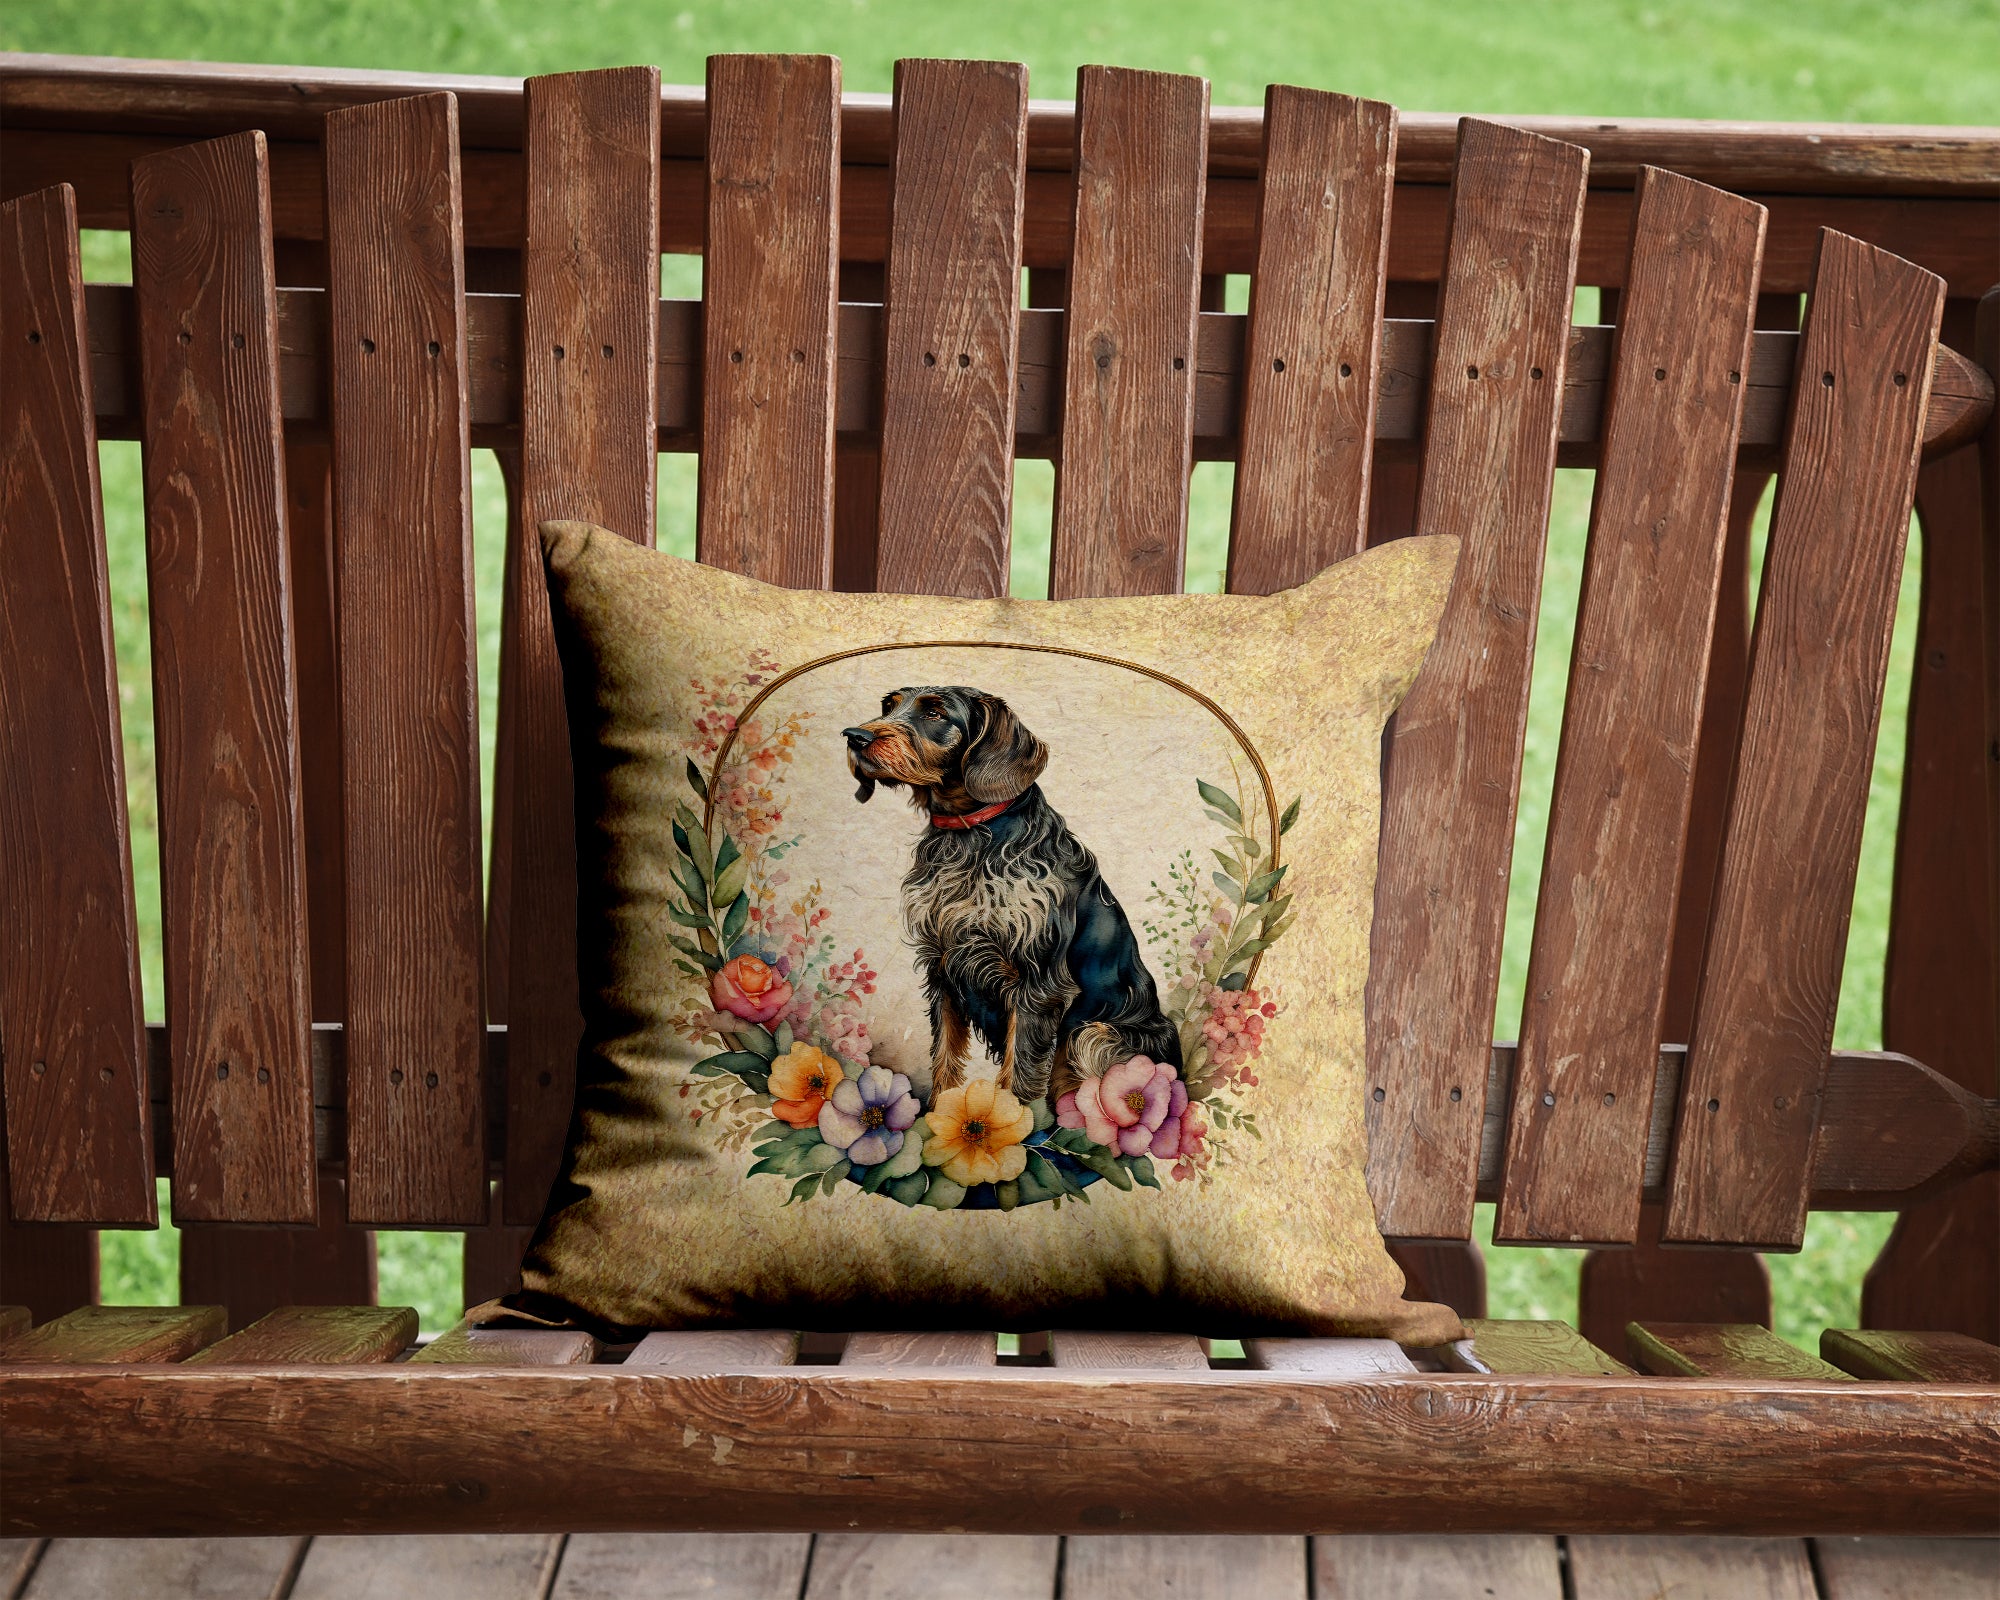 Buy this German Wirehaired Pointer and Flowers Fabric Decorative Pillow